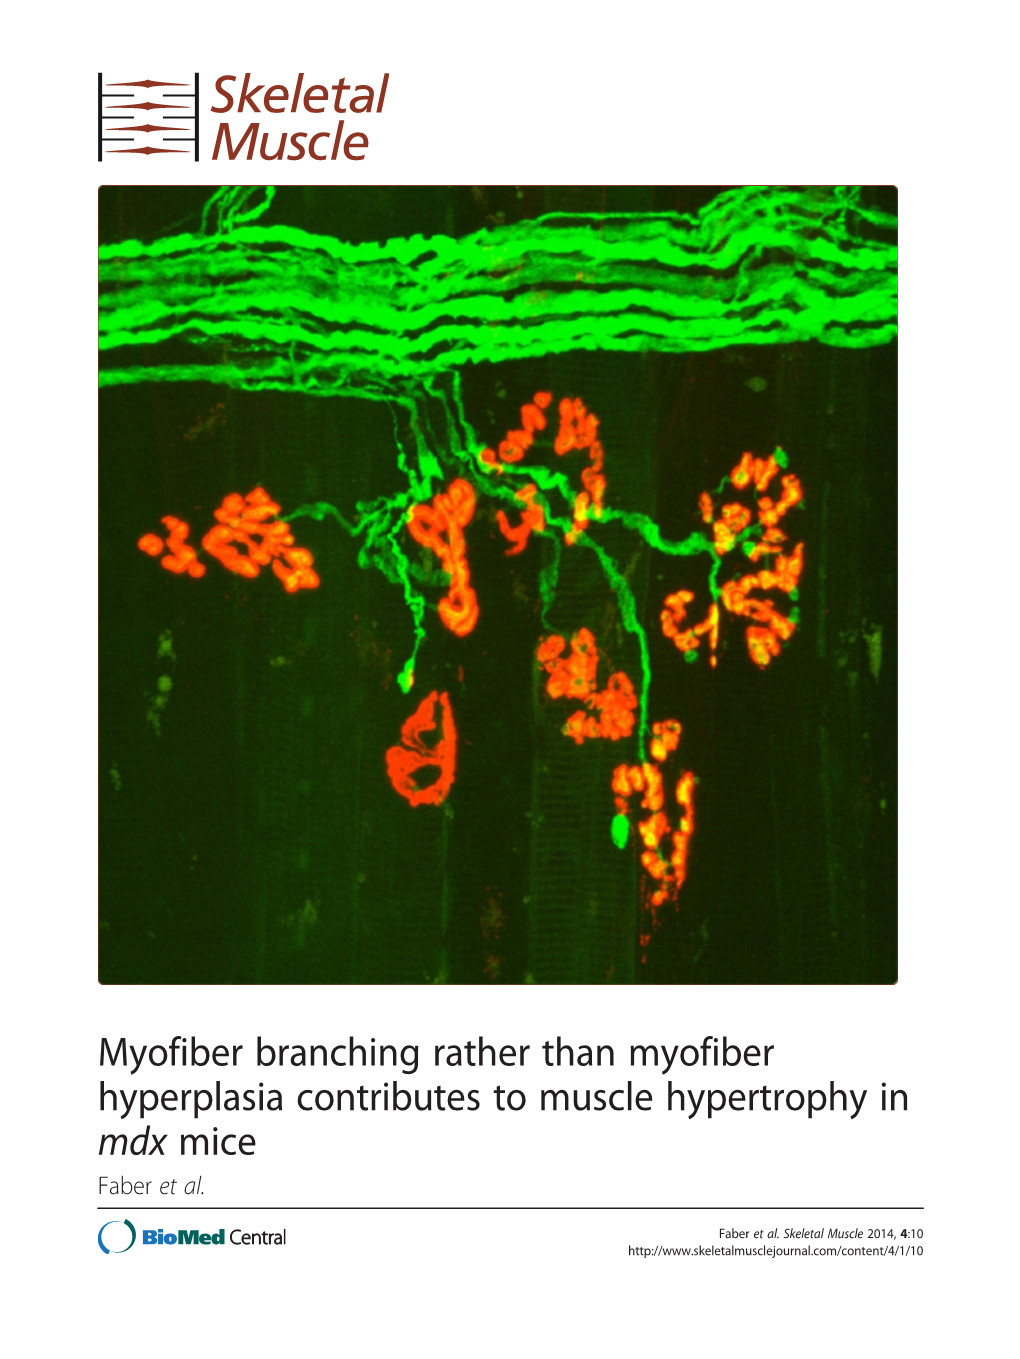 Myofiber Branching Rather Than Myofiber Hyperplasia Contributes to Muscle Hypertrophy in Mdx Mice Faber Et Al